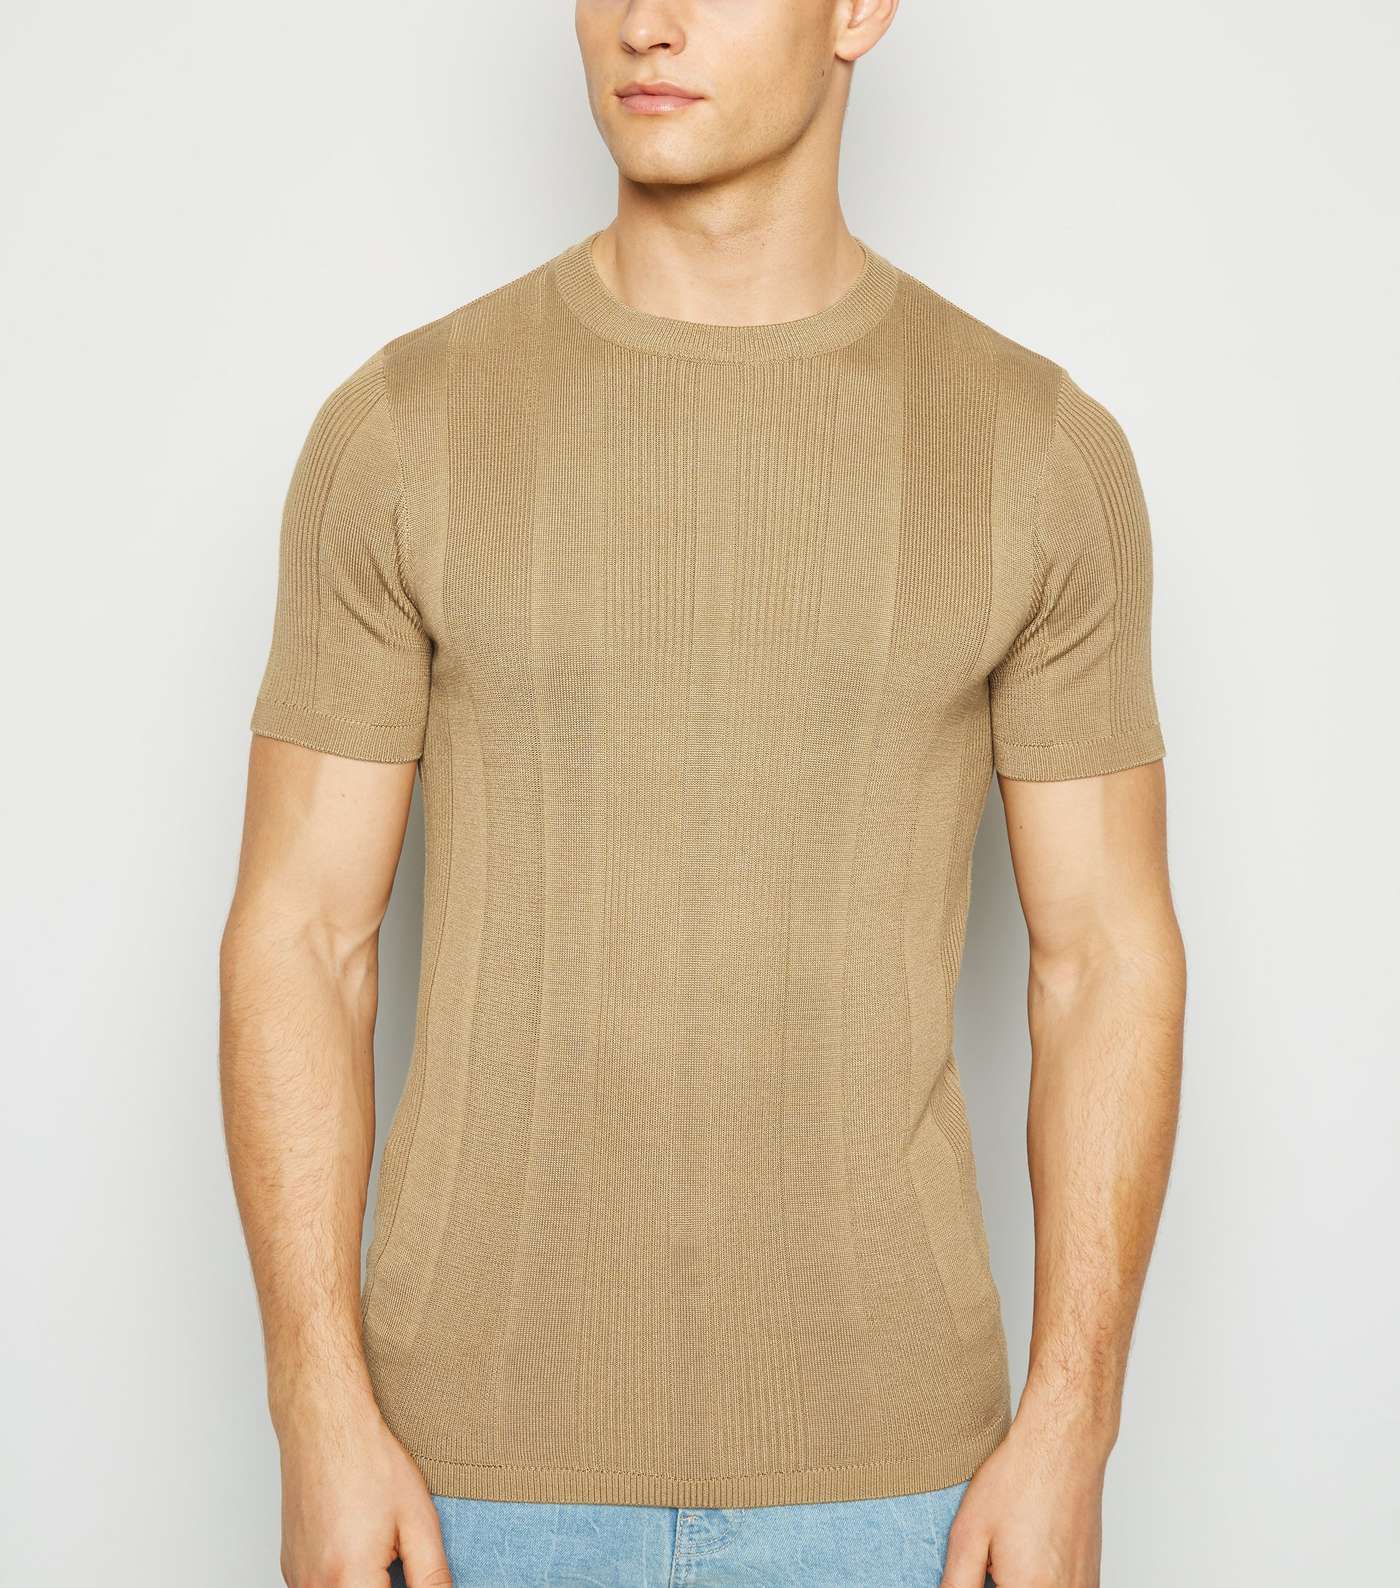 Brown Knit Short Sleeve Muscle Fit T-Shirt